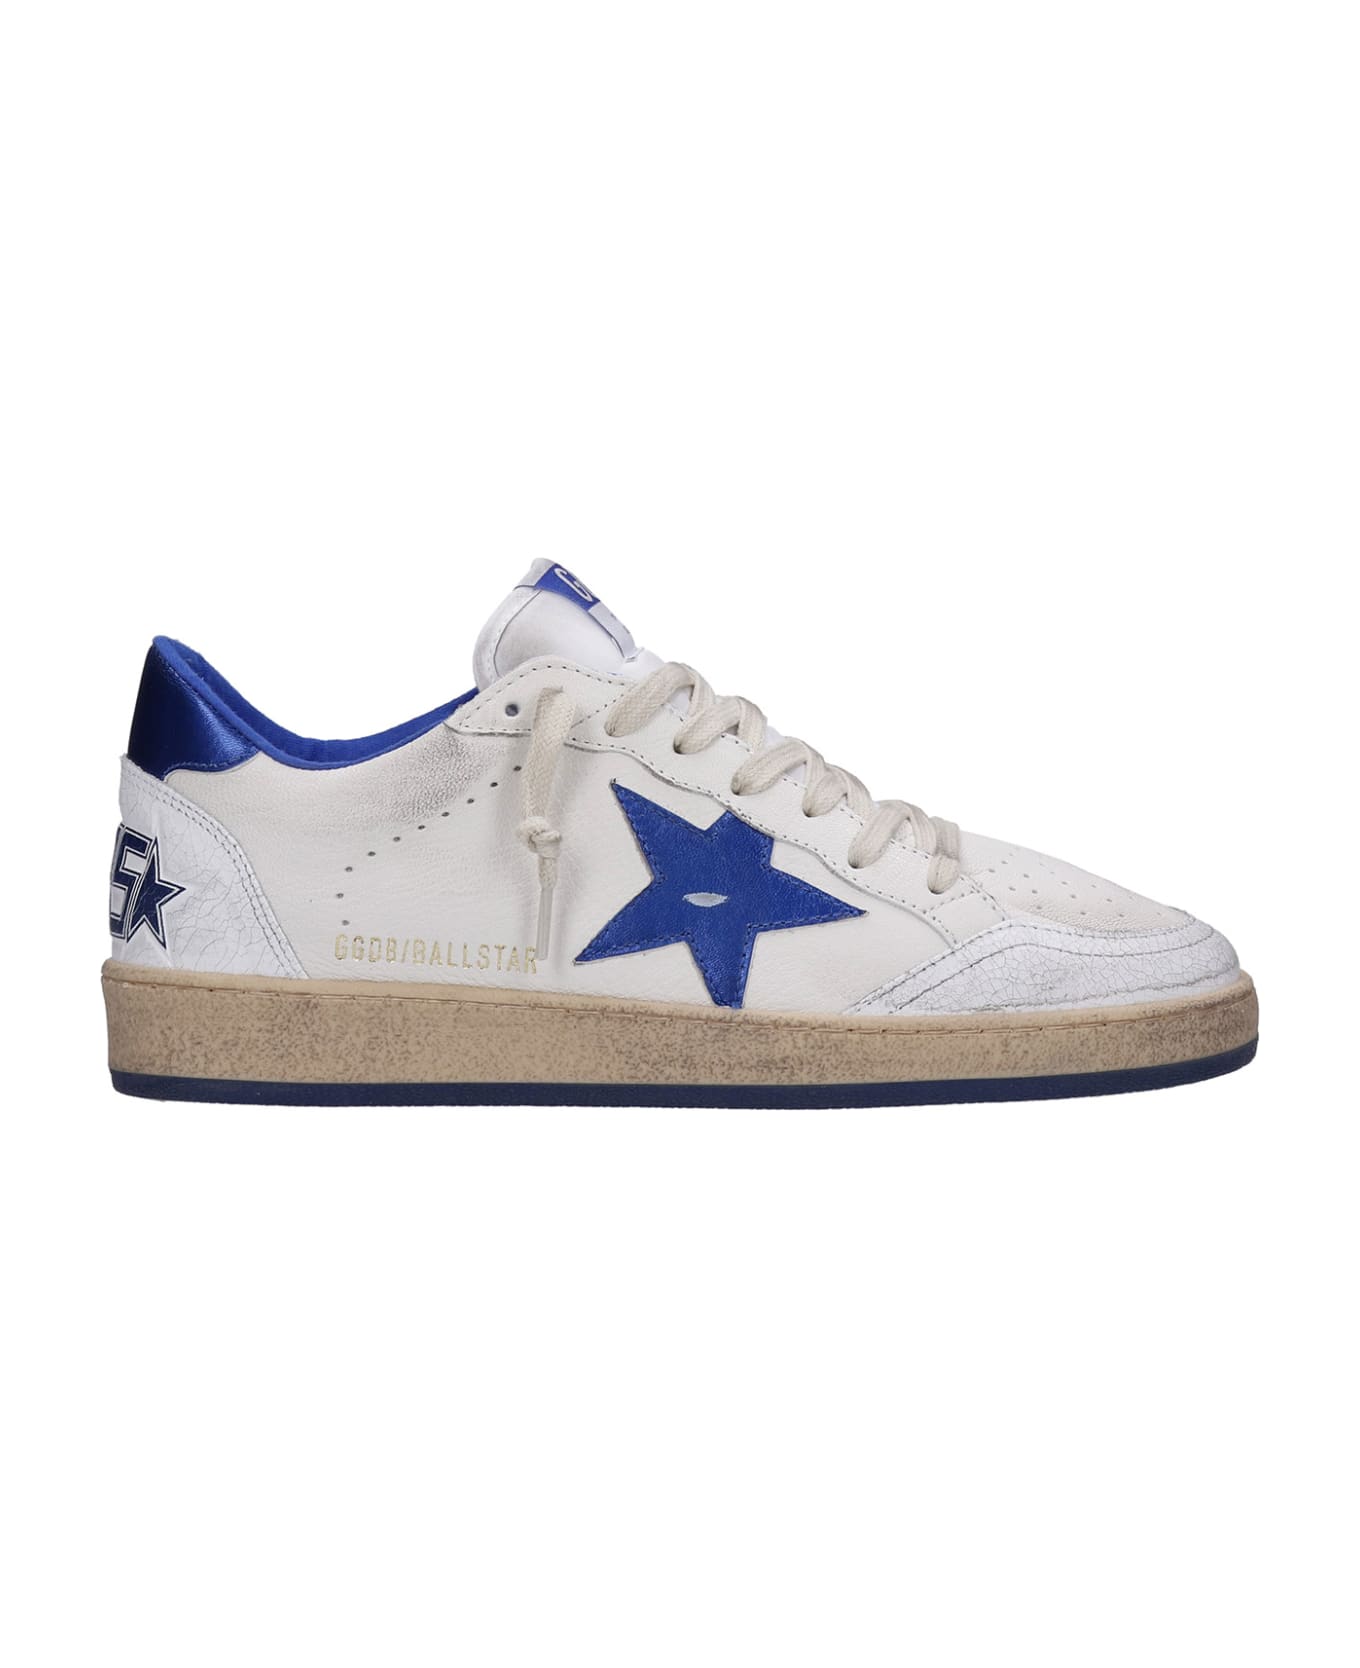 Golden Goose Ball Star Sneakers In White Leather - Bianco スニーカー